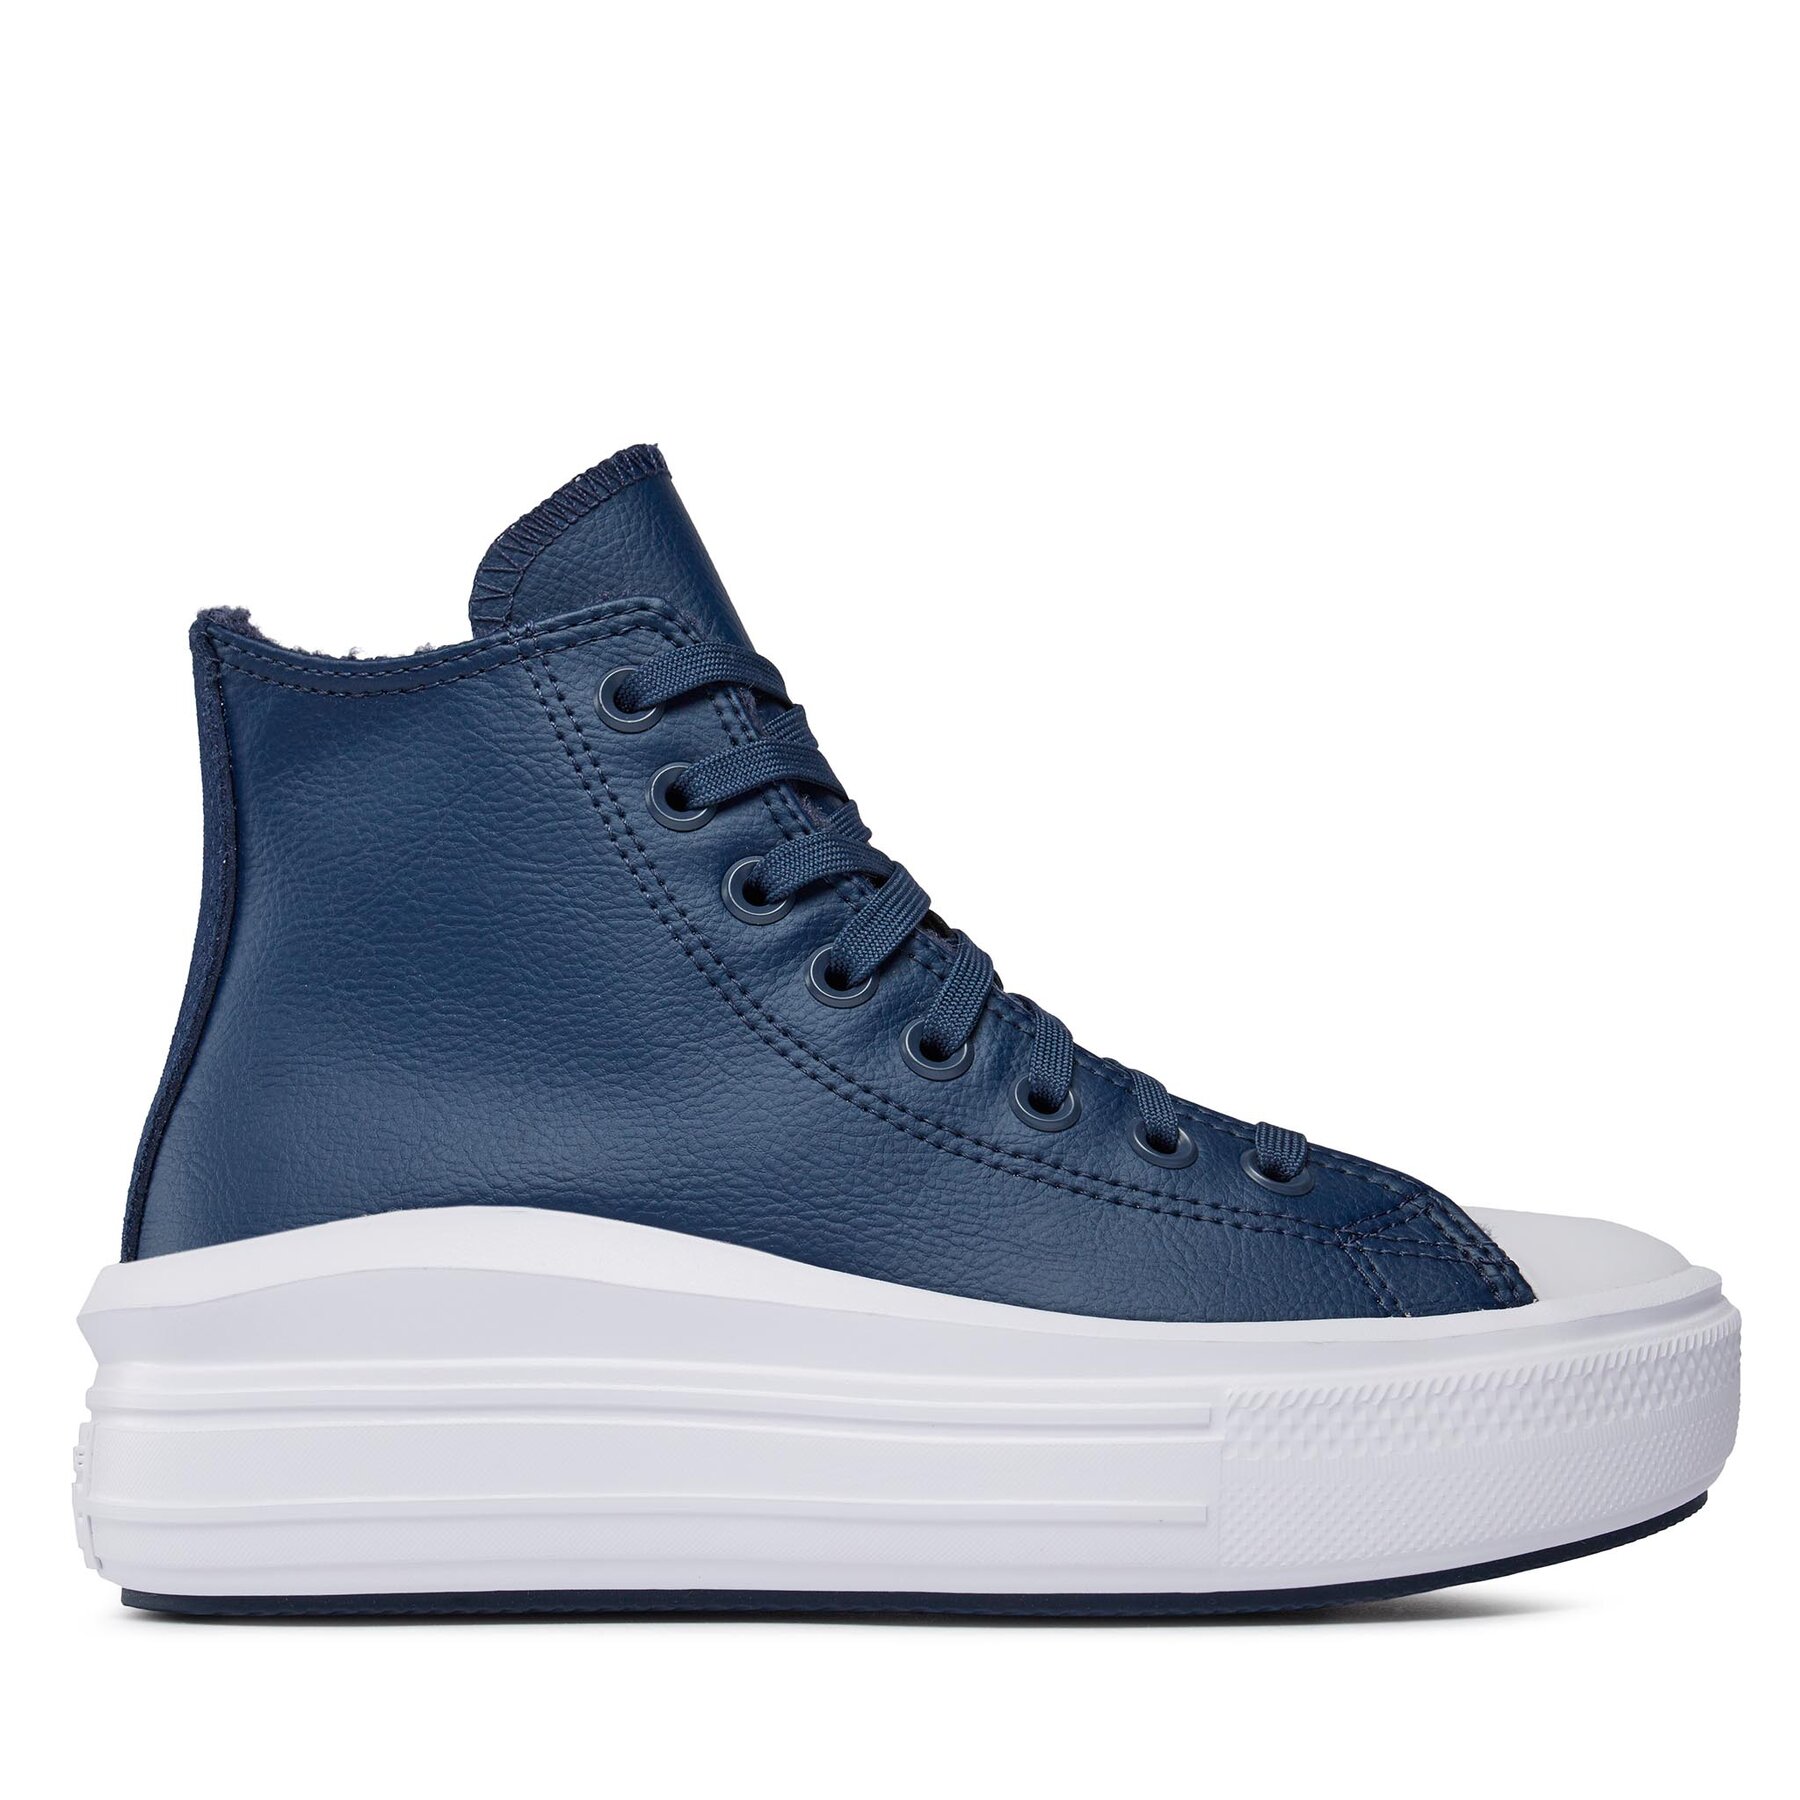 Sneakers aus Stoff Converse Chuck Taylor All Star Move A06781C Navy von Converse